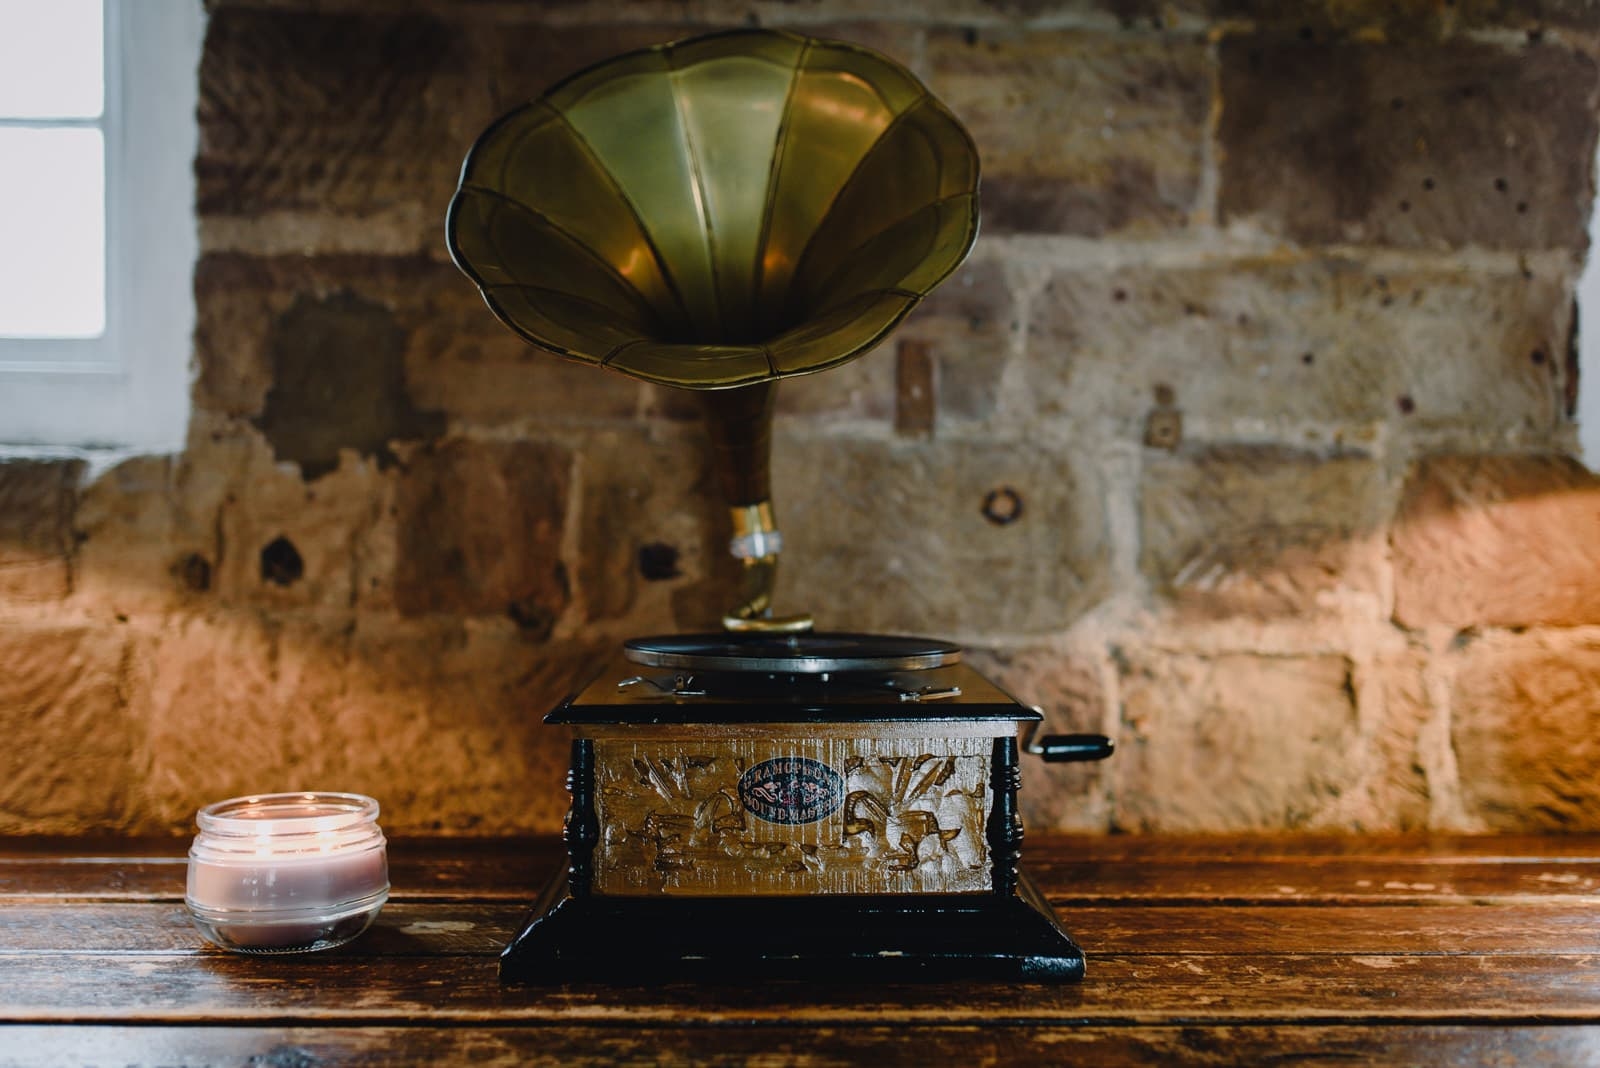 gramophone at west mill wedding venue